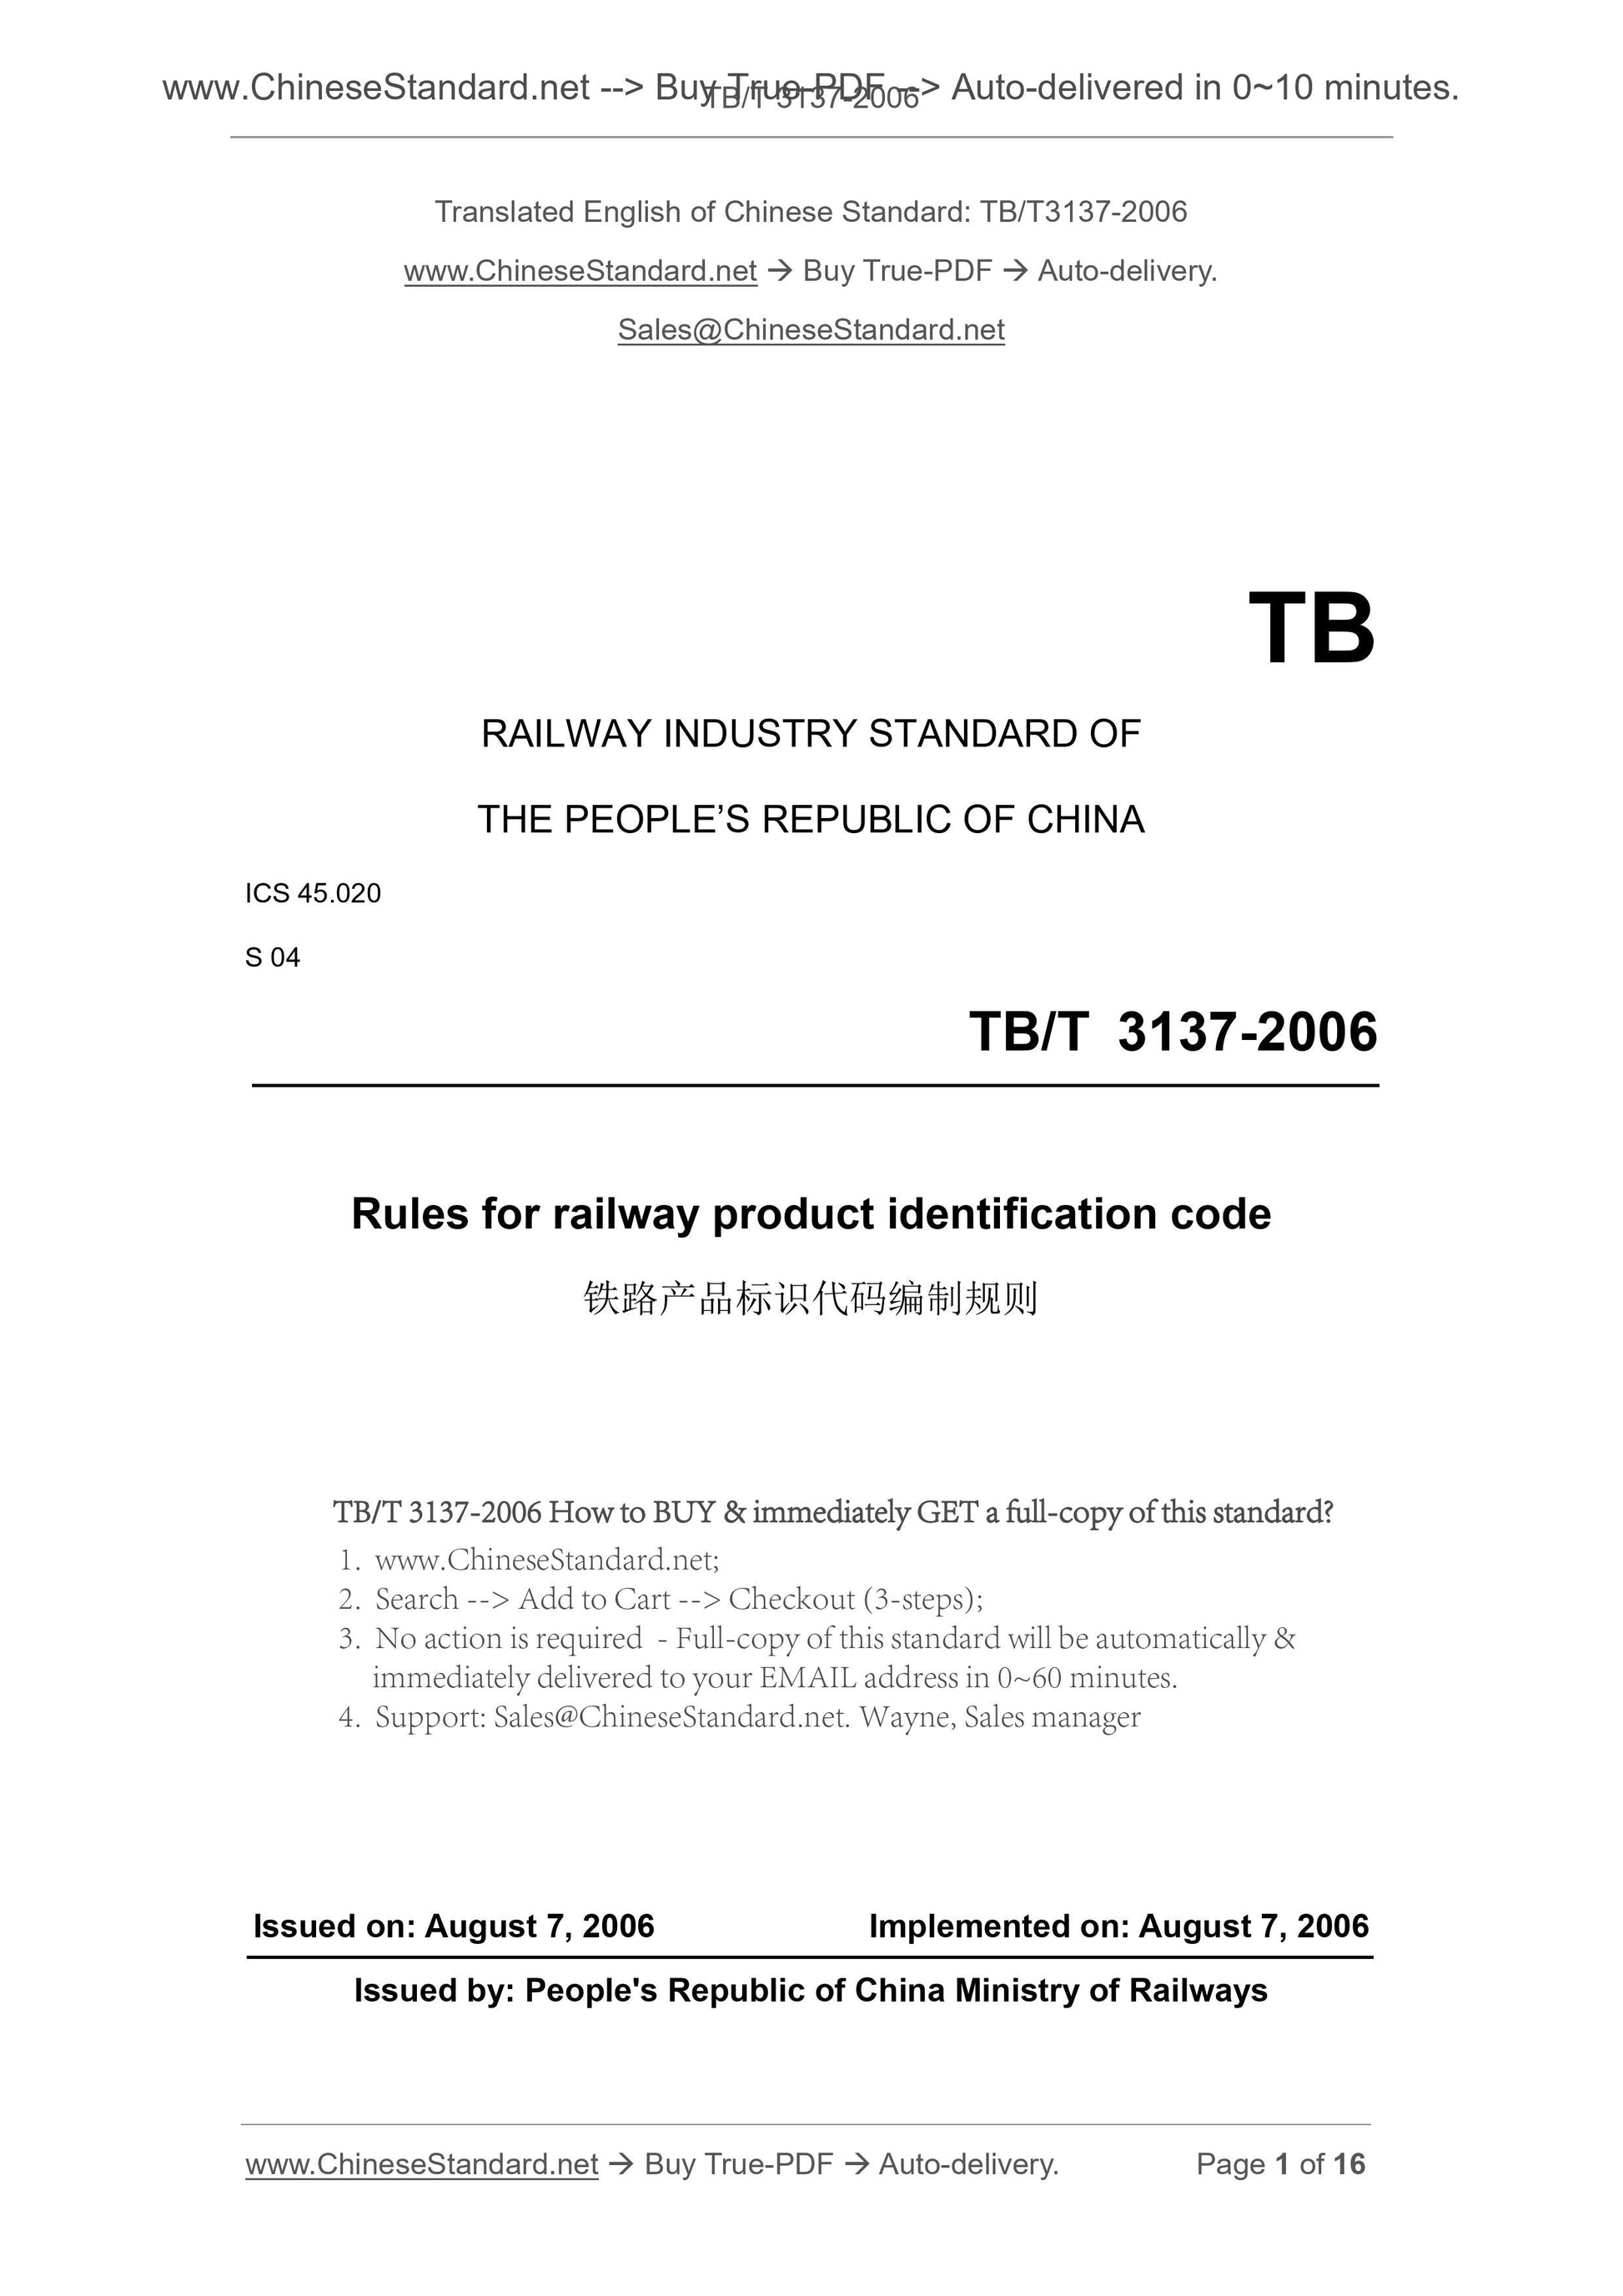 TB/T 3137-2006 Page 1